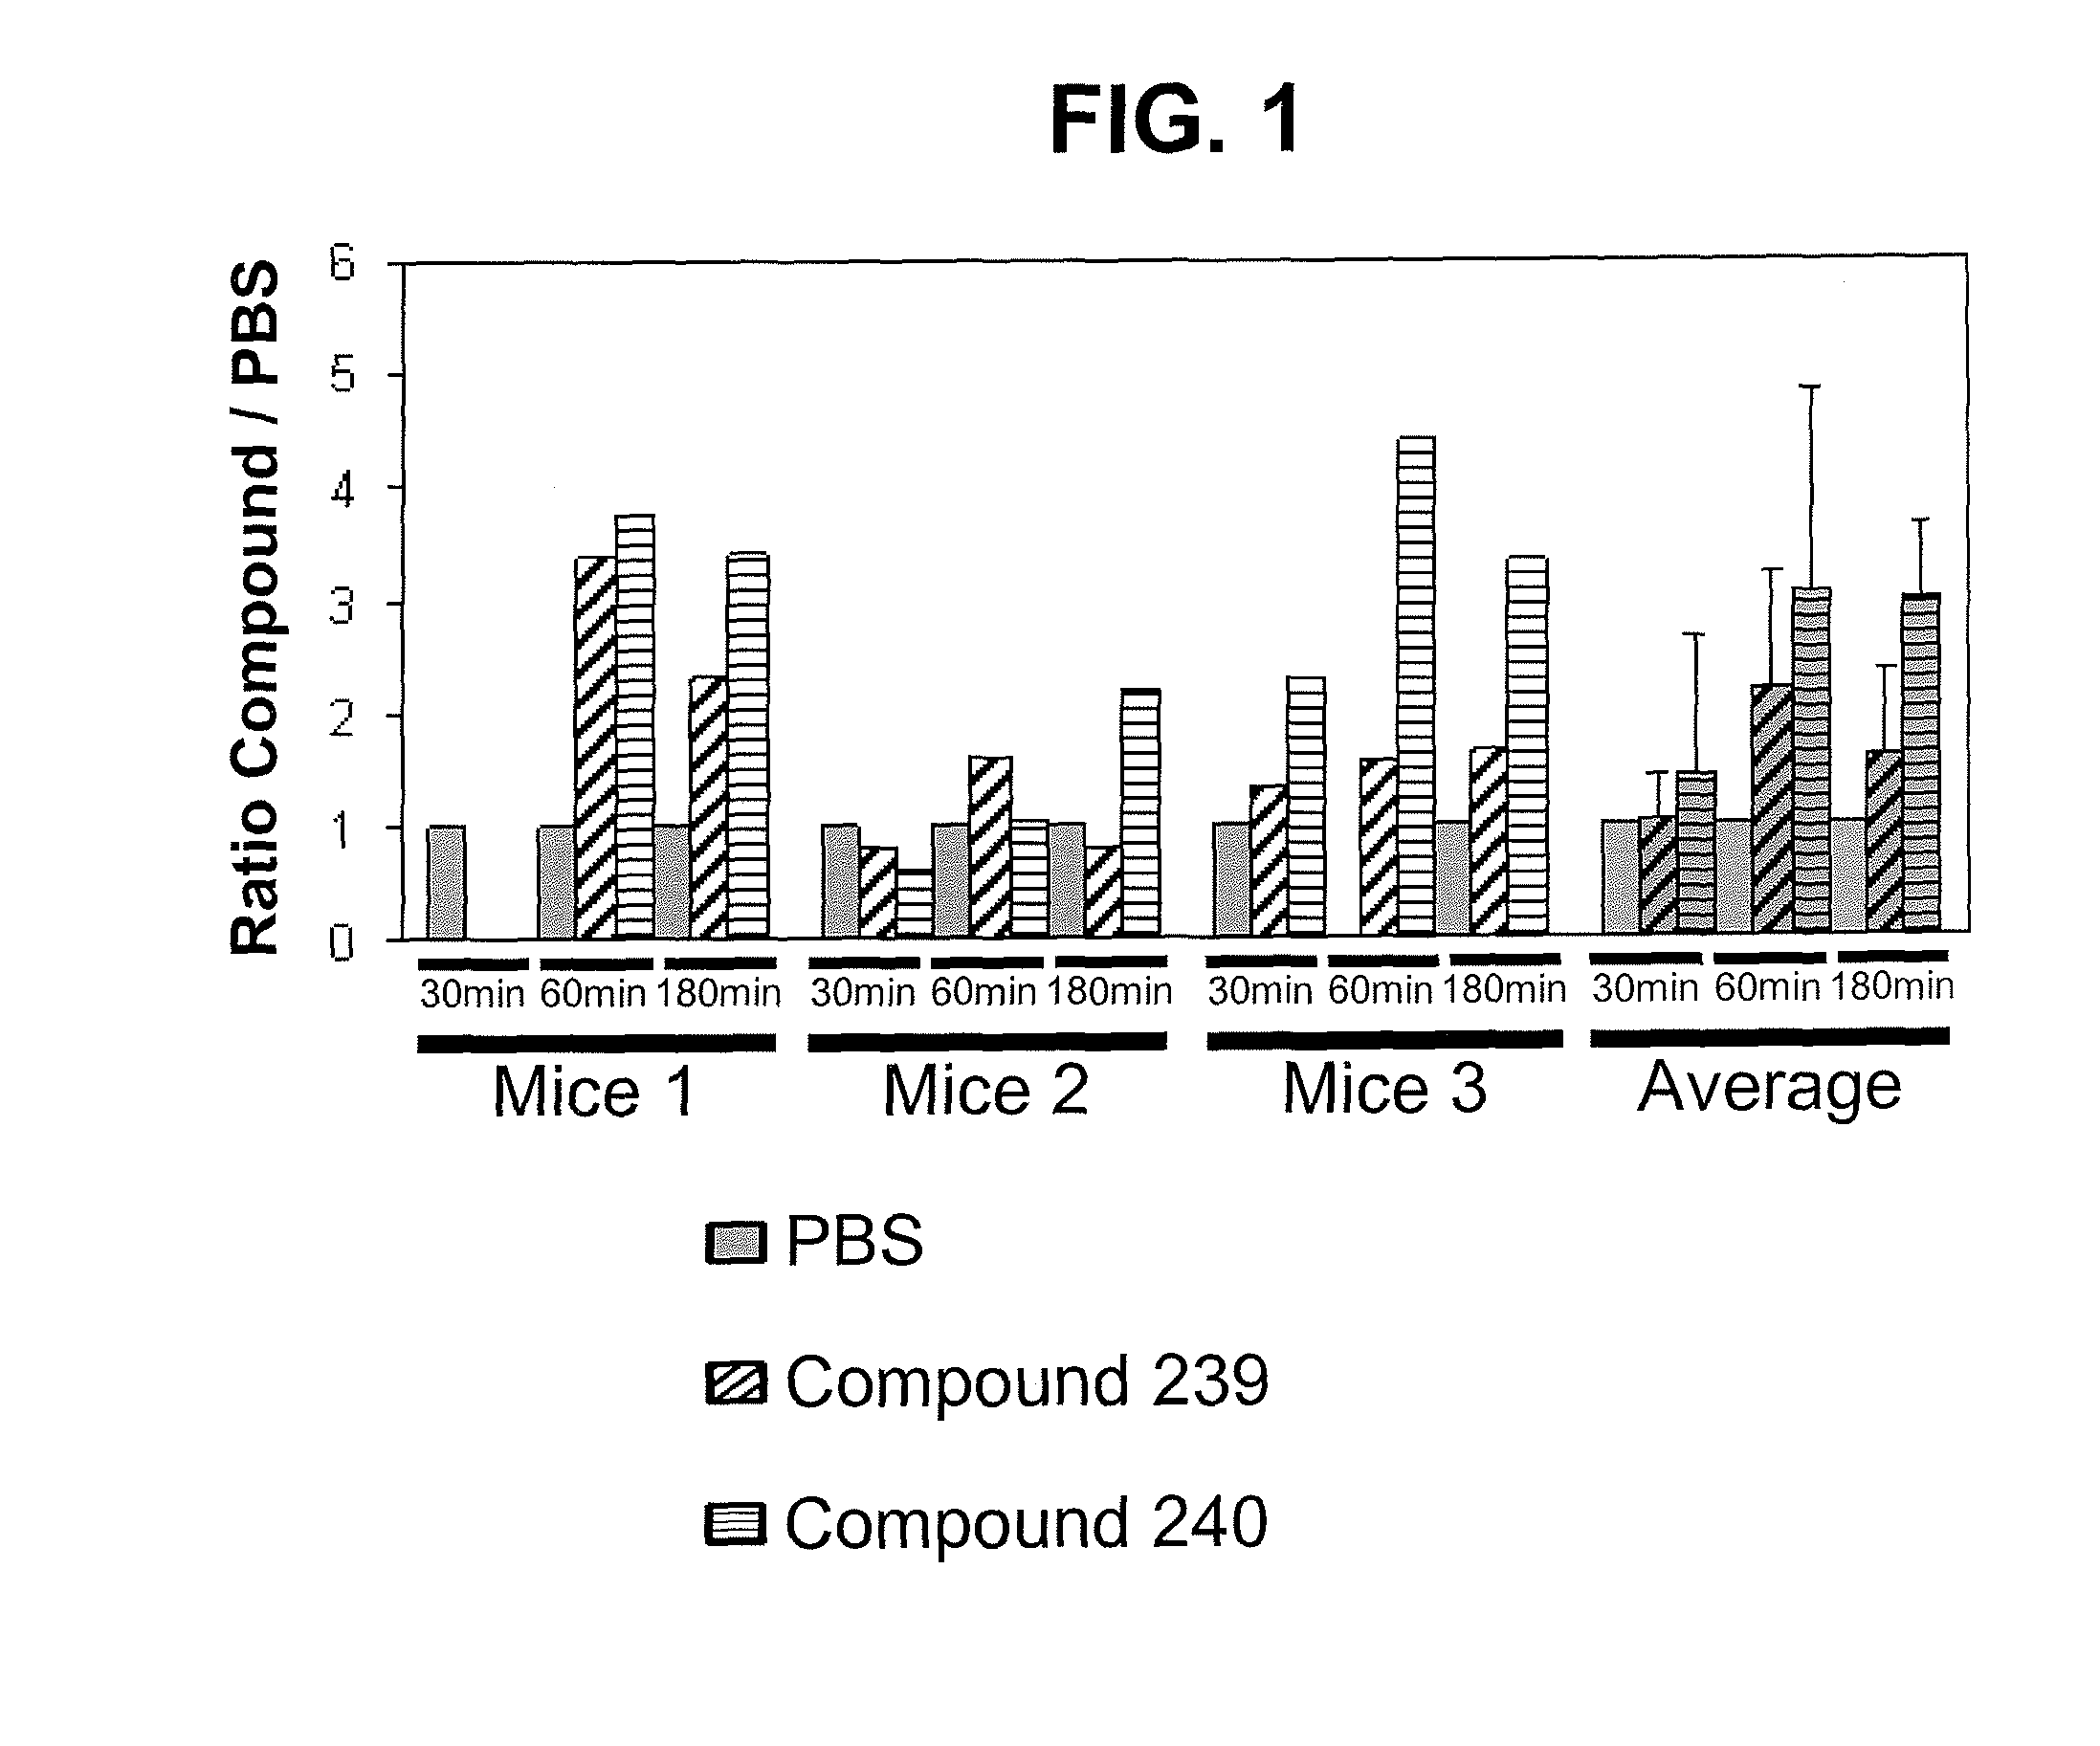 Oligosaccharide compounds for use in mobilising stem cells